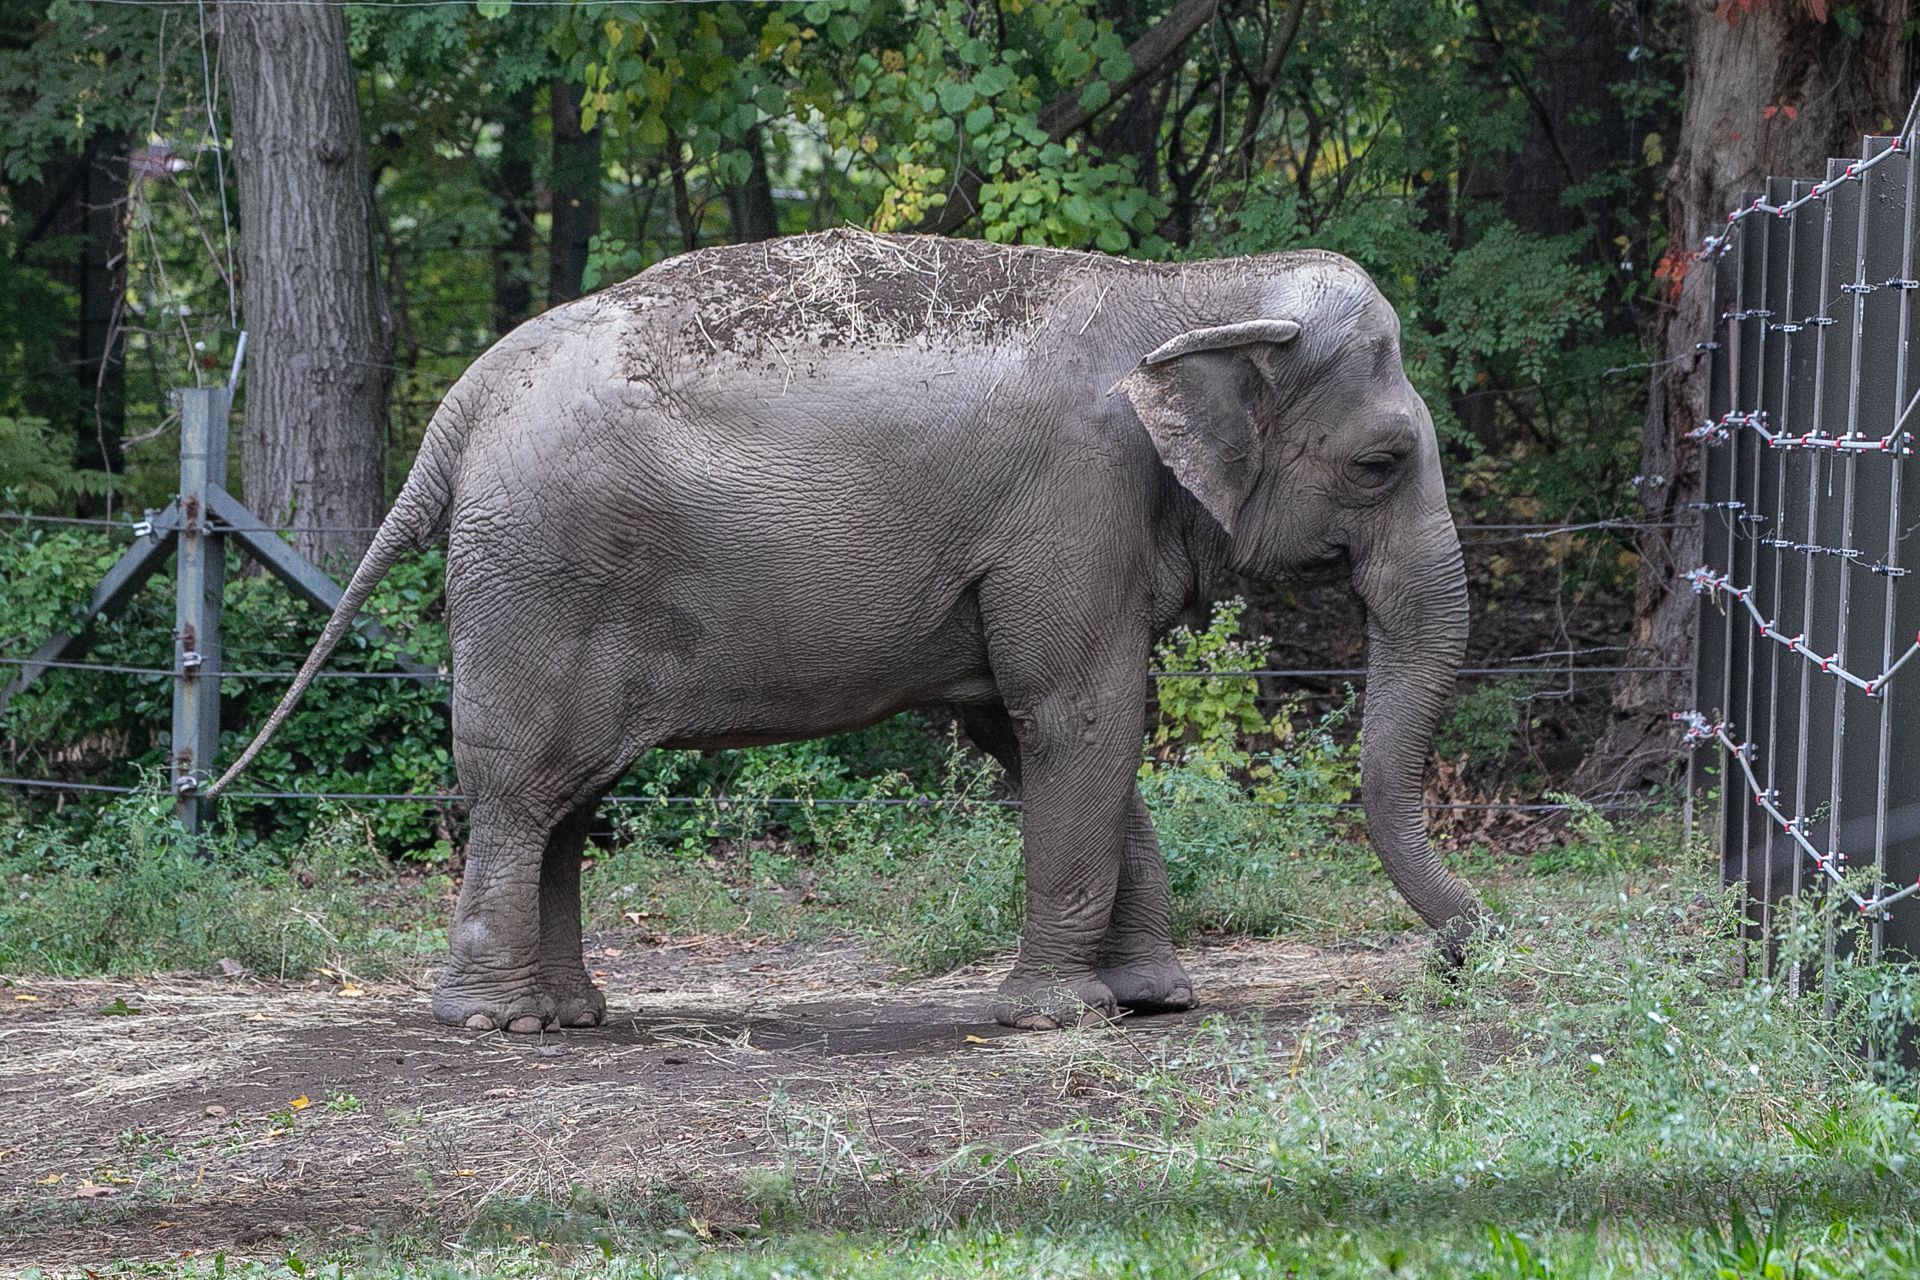 Happy the Elephant Is Not a Person, Court Rules